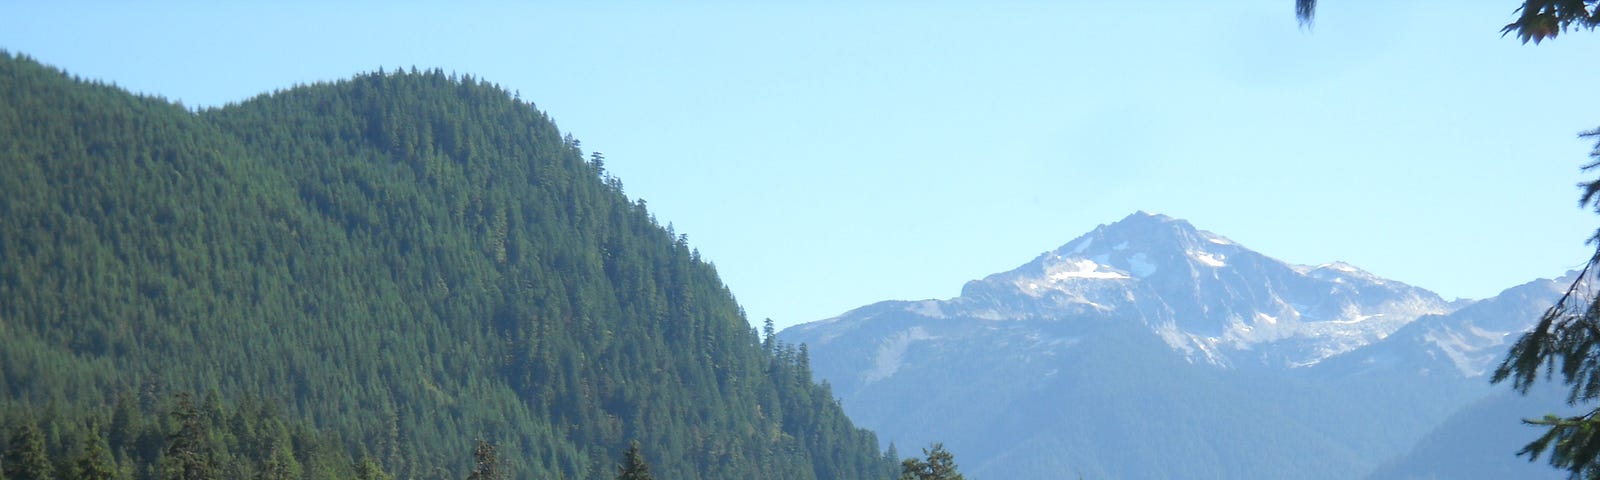 a distant mountain with some snow on it, a closer forested hill, and a tree-lined lakefront